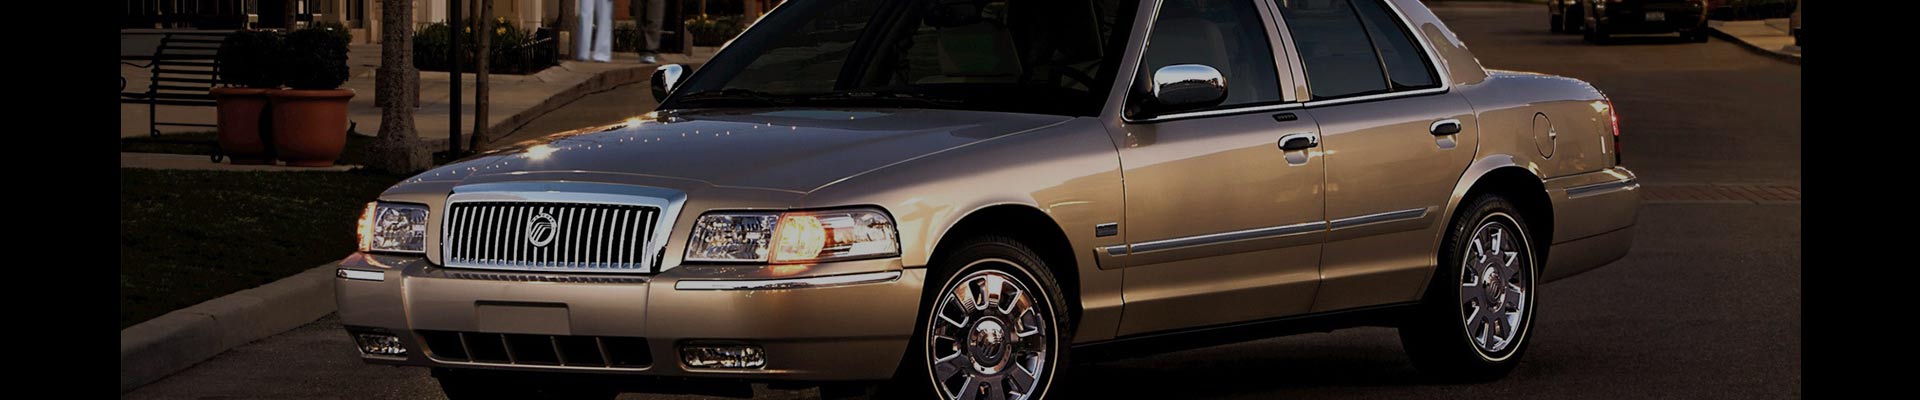 Shop Replacement and OEM 1996 Mercury Grand Marquis Parts with Discounted Price on the Net